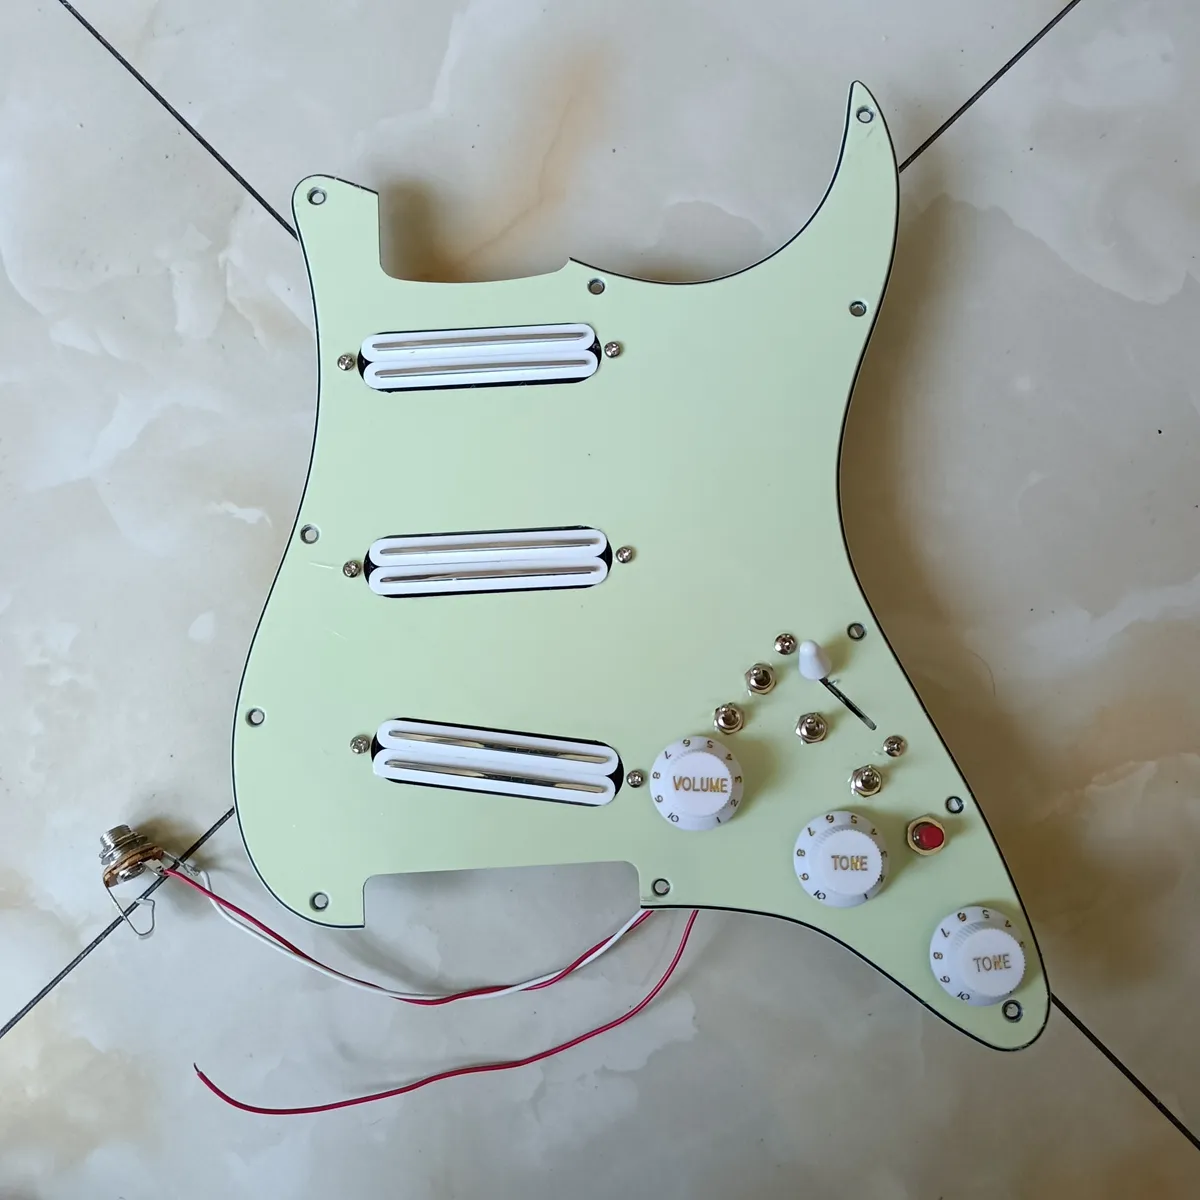 SSS Upgrade Loaded PickGuard Set Multifunction Switch White Mini Humbucker Pickups 7 Ways Plockle Welding Harness for FD Guitar 20 Style Combinations